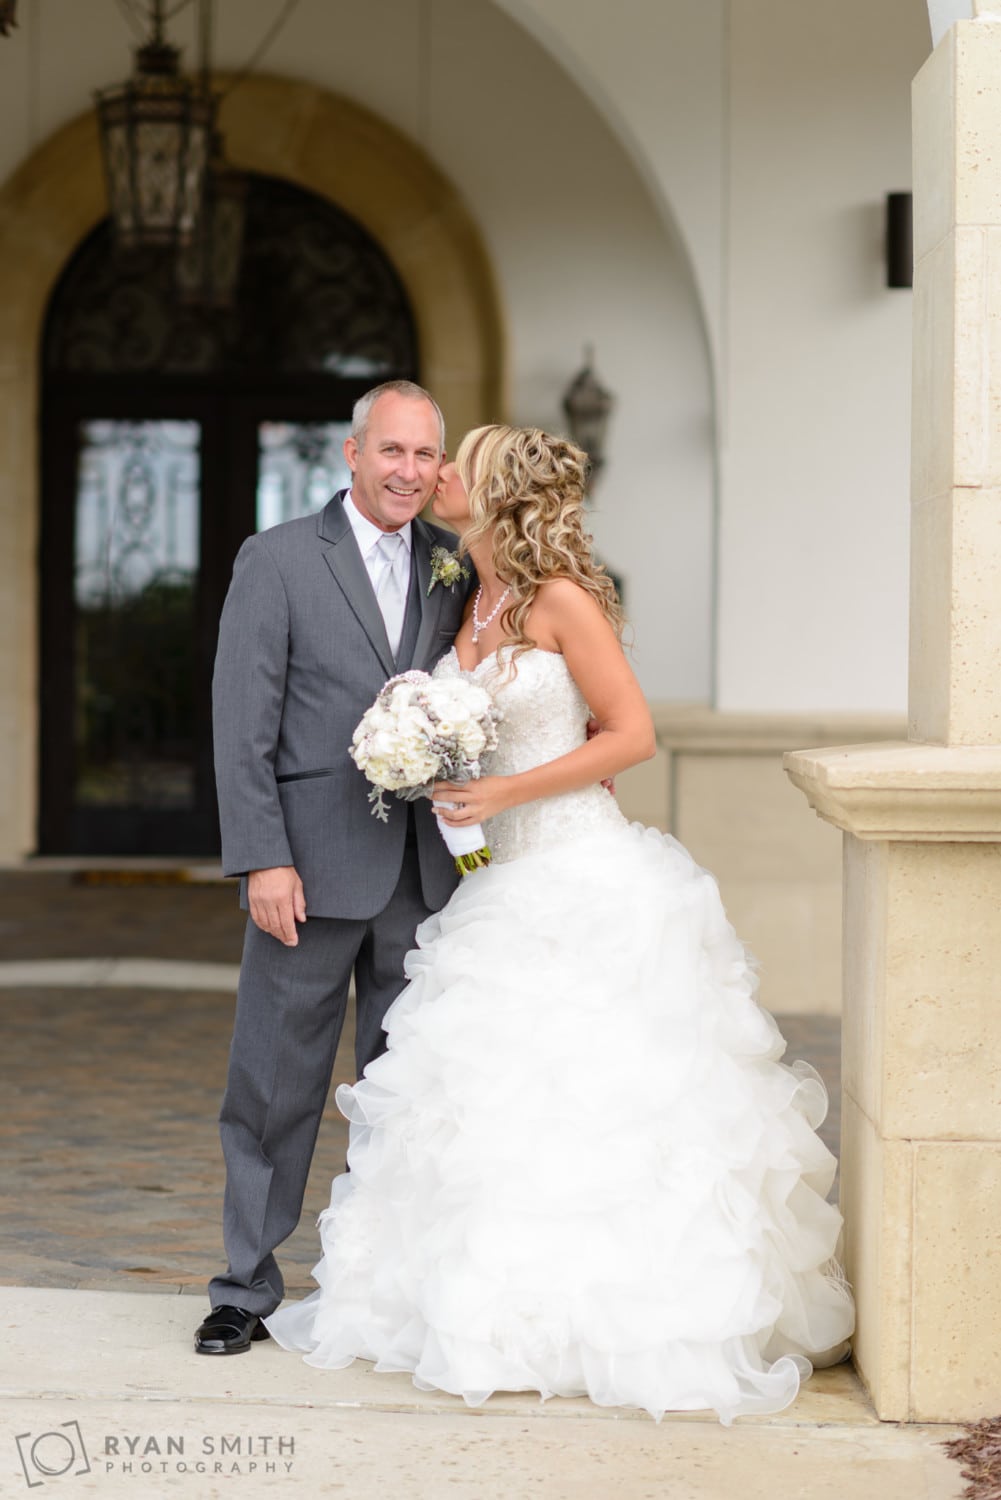 First look with bride's father - Members Club at Grande Dunes